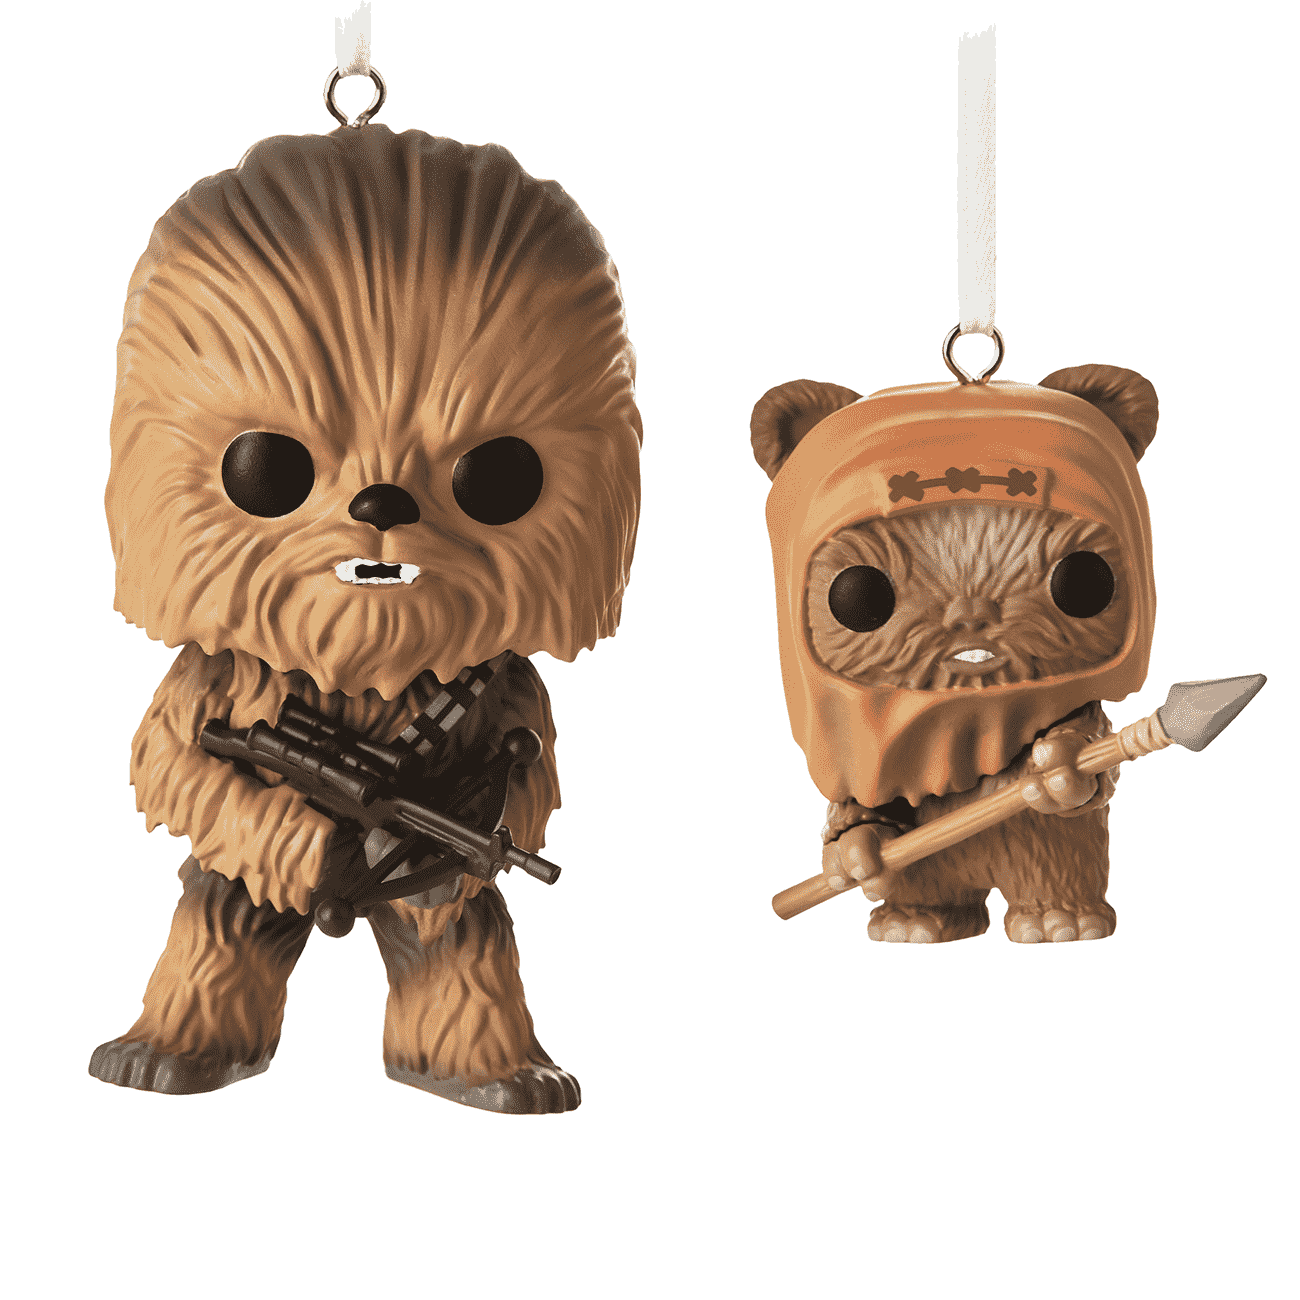 Funko Launches a 'Star Wars' Pop Figure Holiday Special